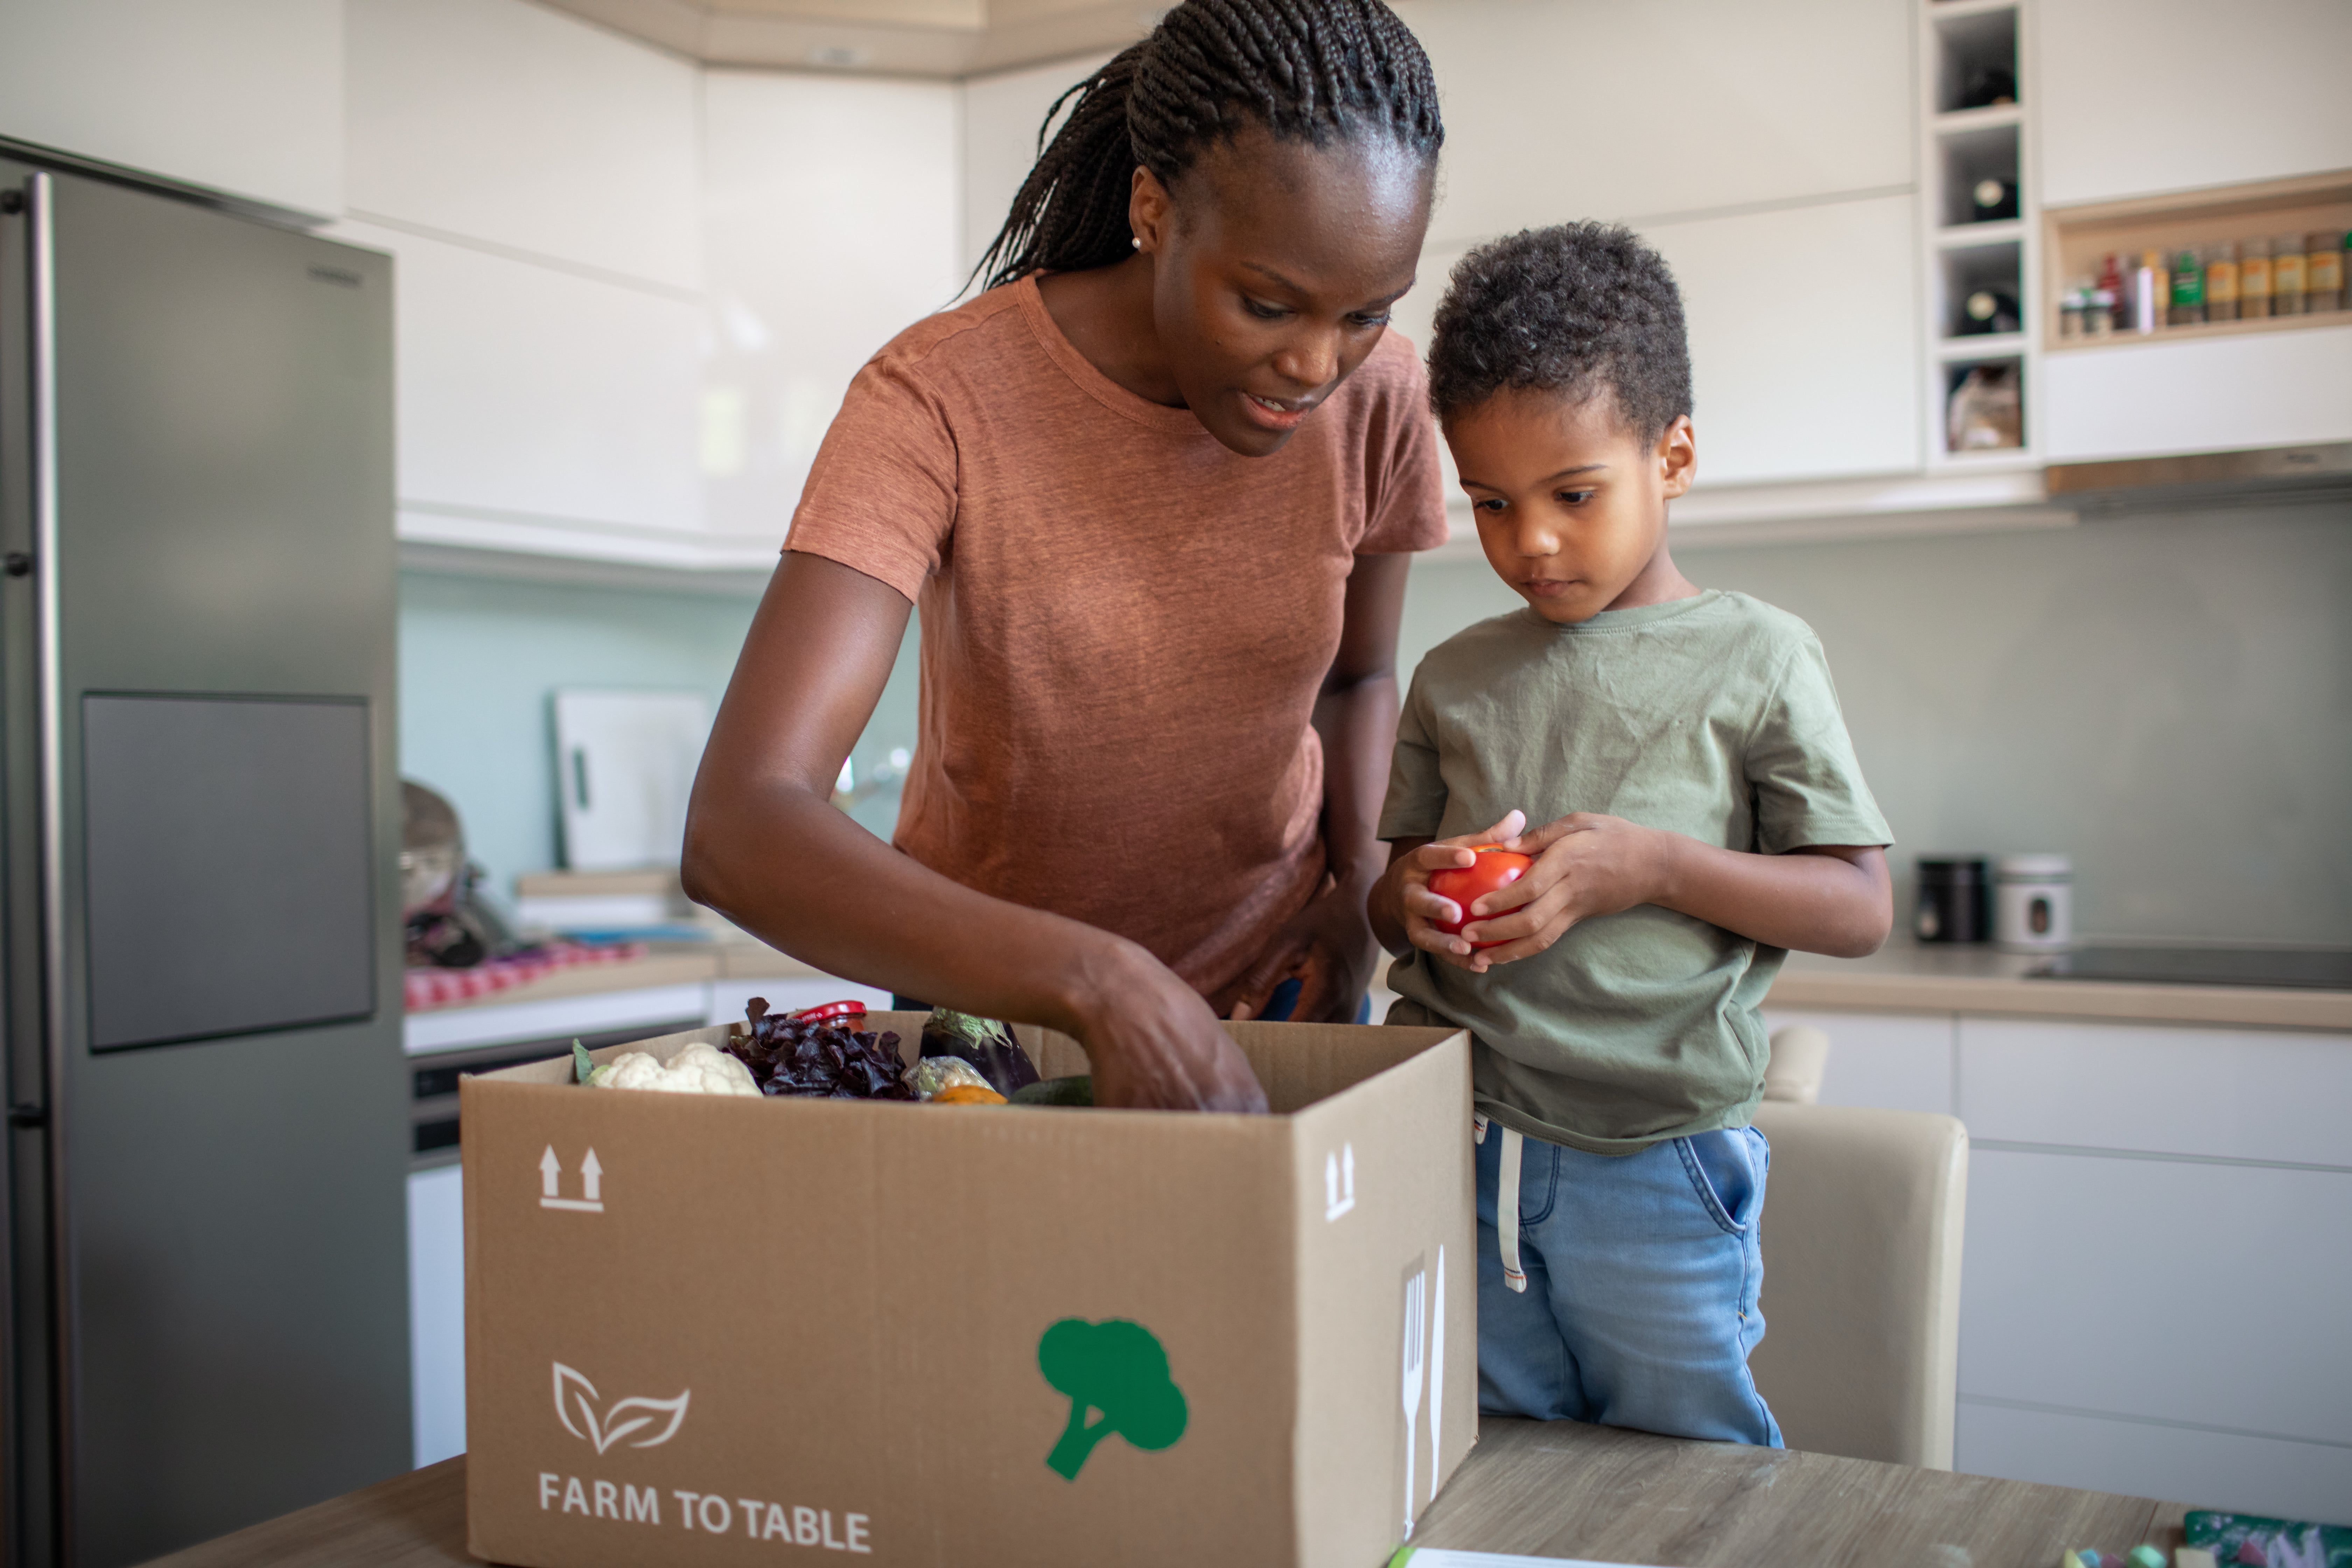 Meal Kits Like Blue Apron Get My Picky Kids to Eat Real Food